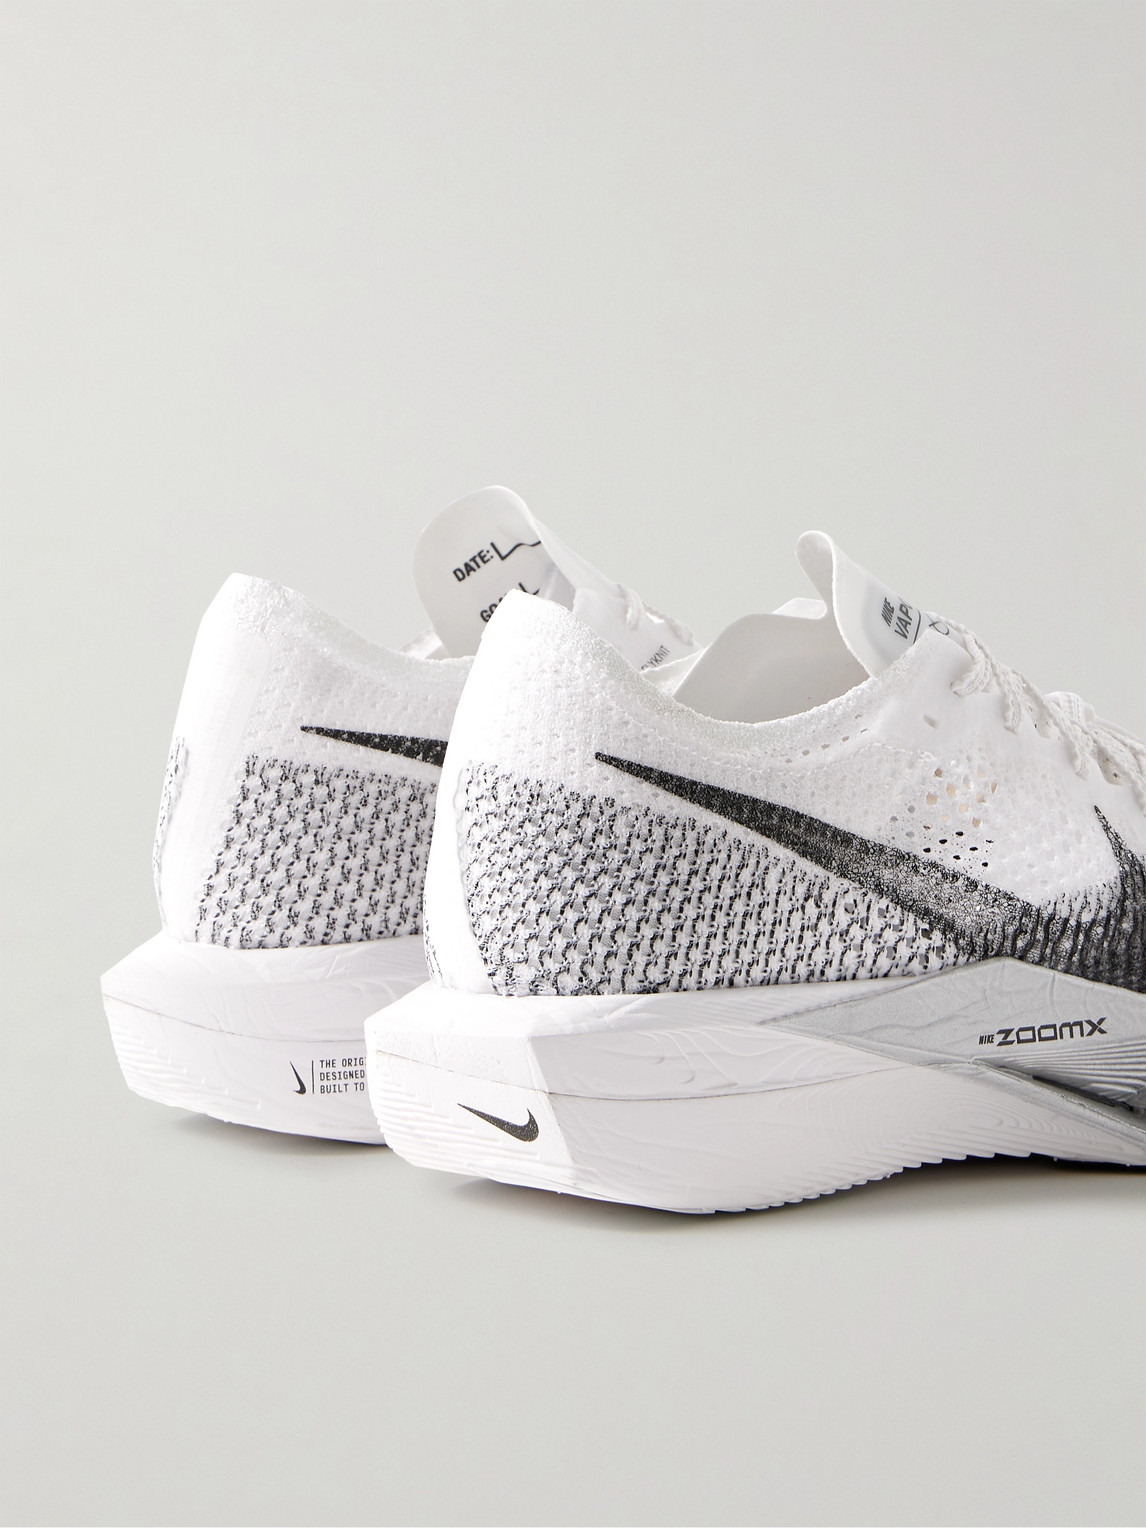 Shop Nike Zoomx Vaporfly 3 Flyknit Running Sneakers In White